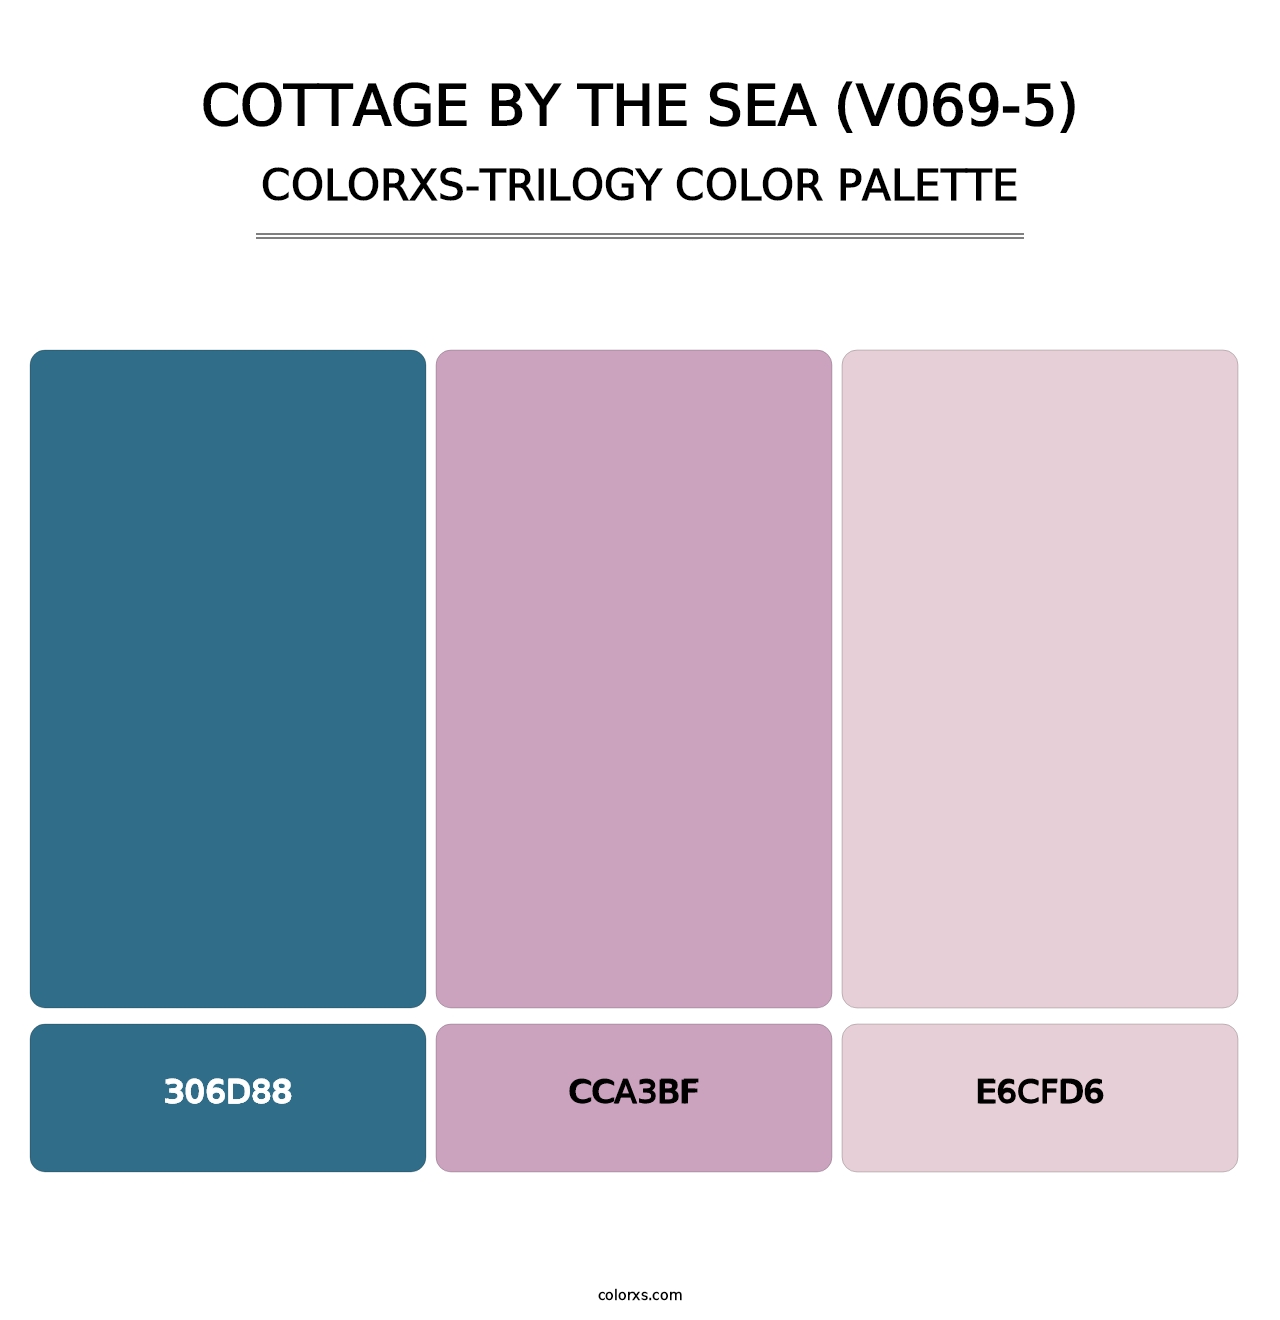 Cottage by the Sea (V069-5) - Colorxs Trilogy Palette